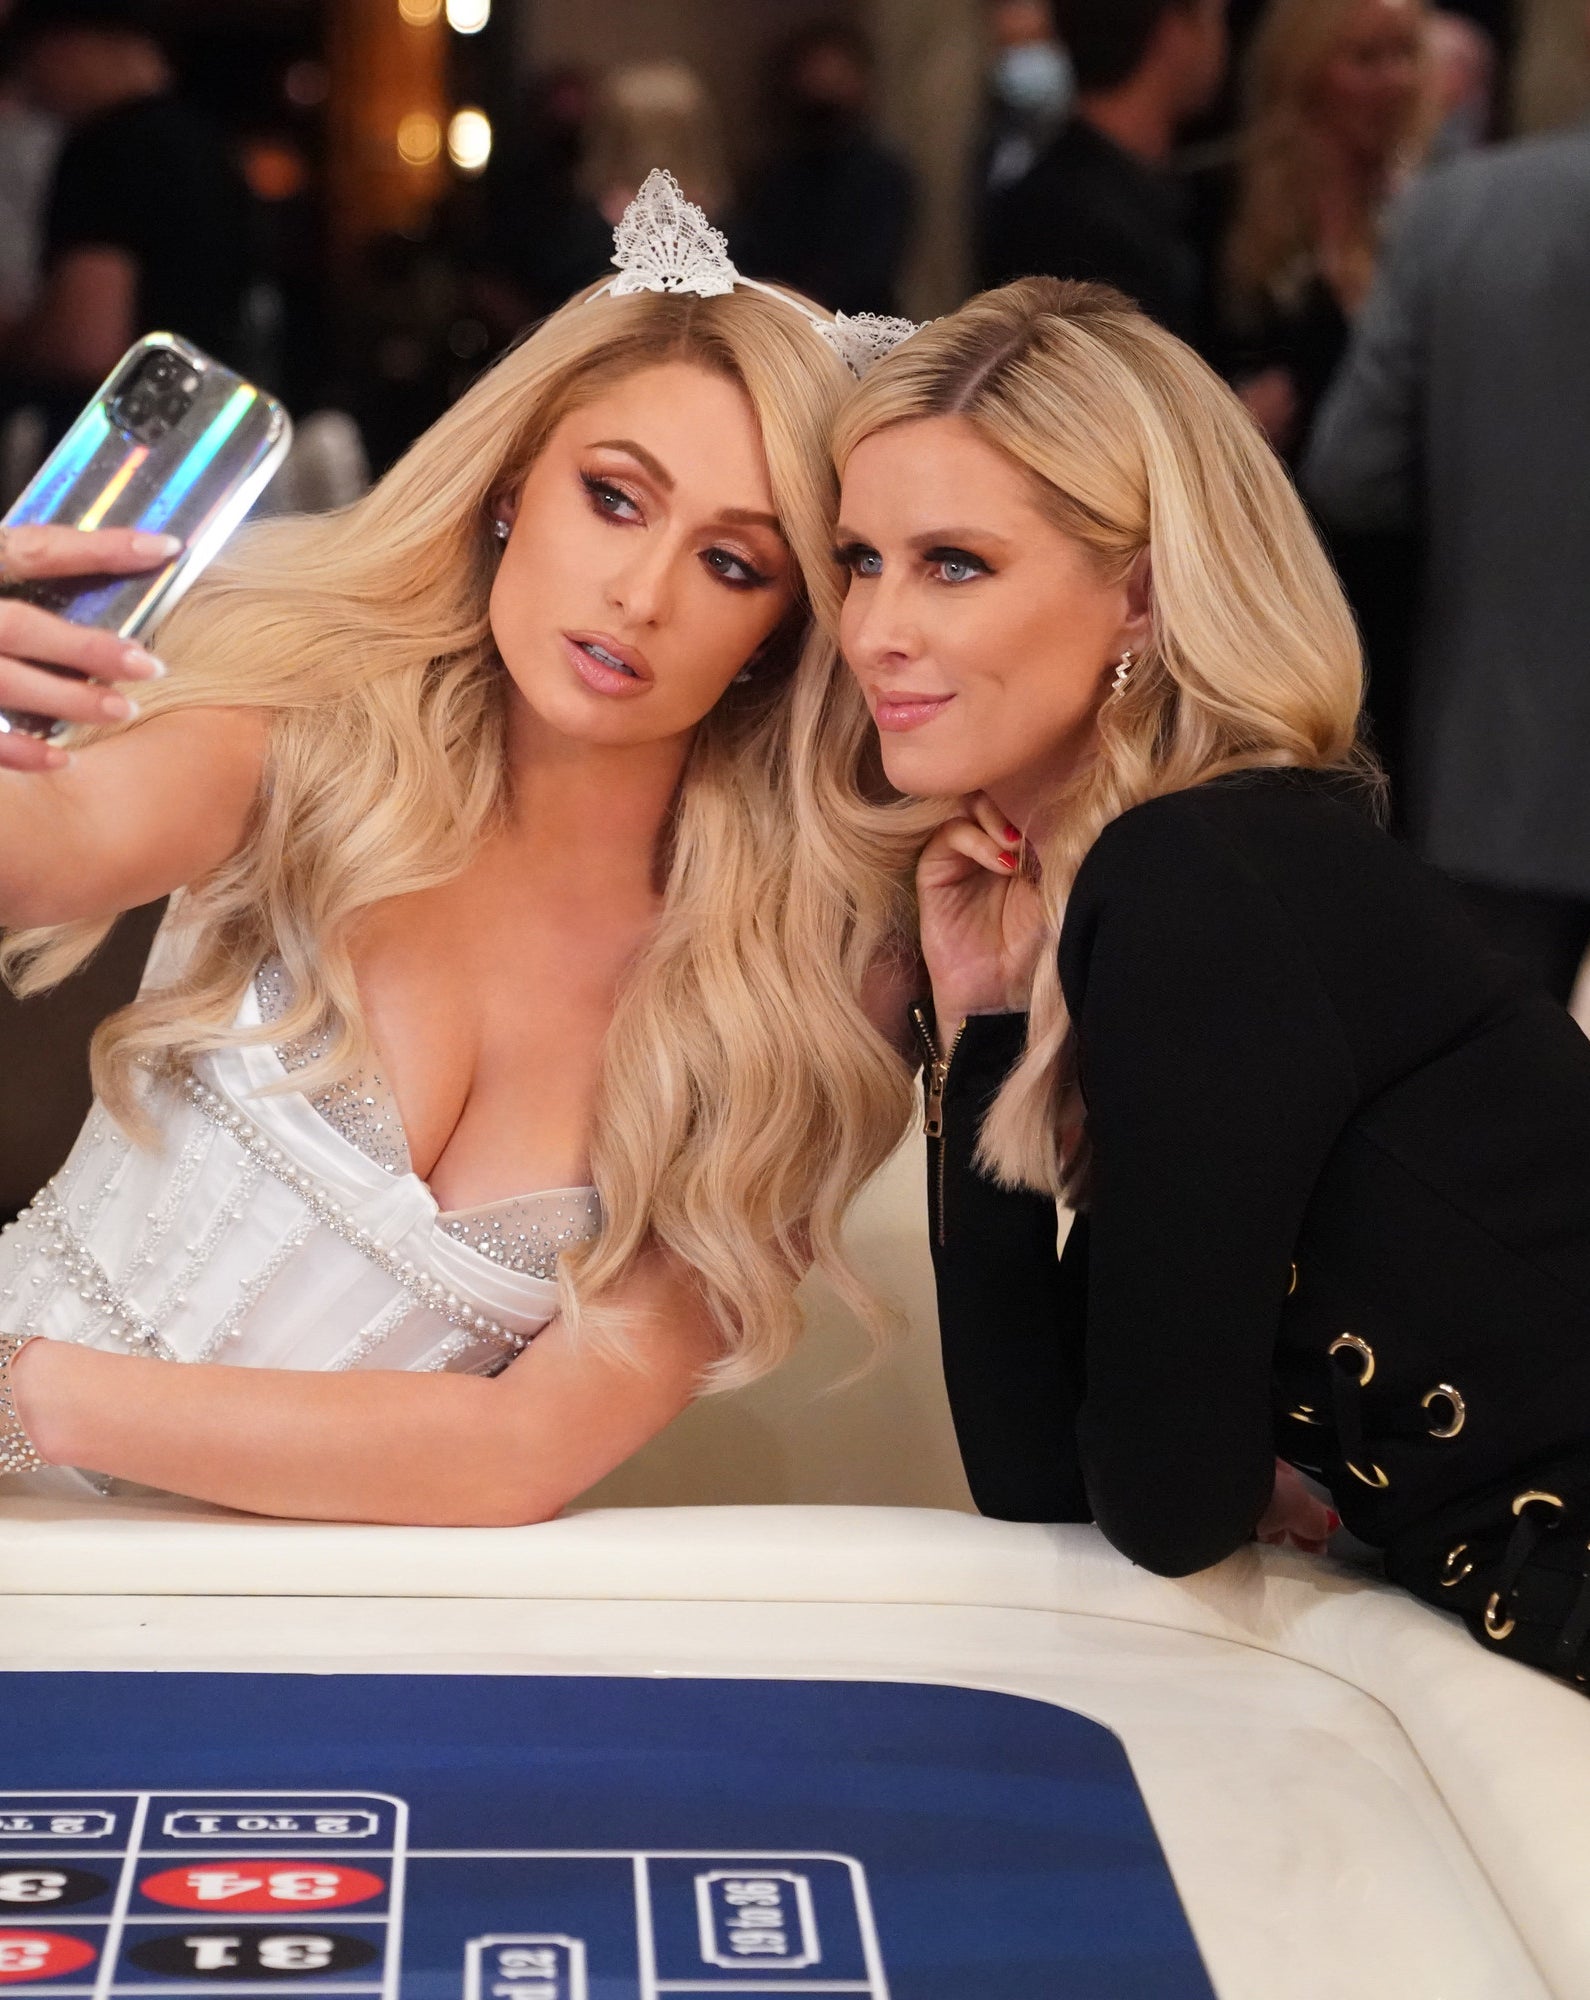 paris hilton taking a selfie with her sister at her vegas wedding